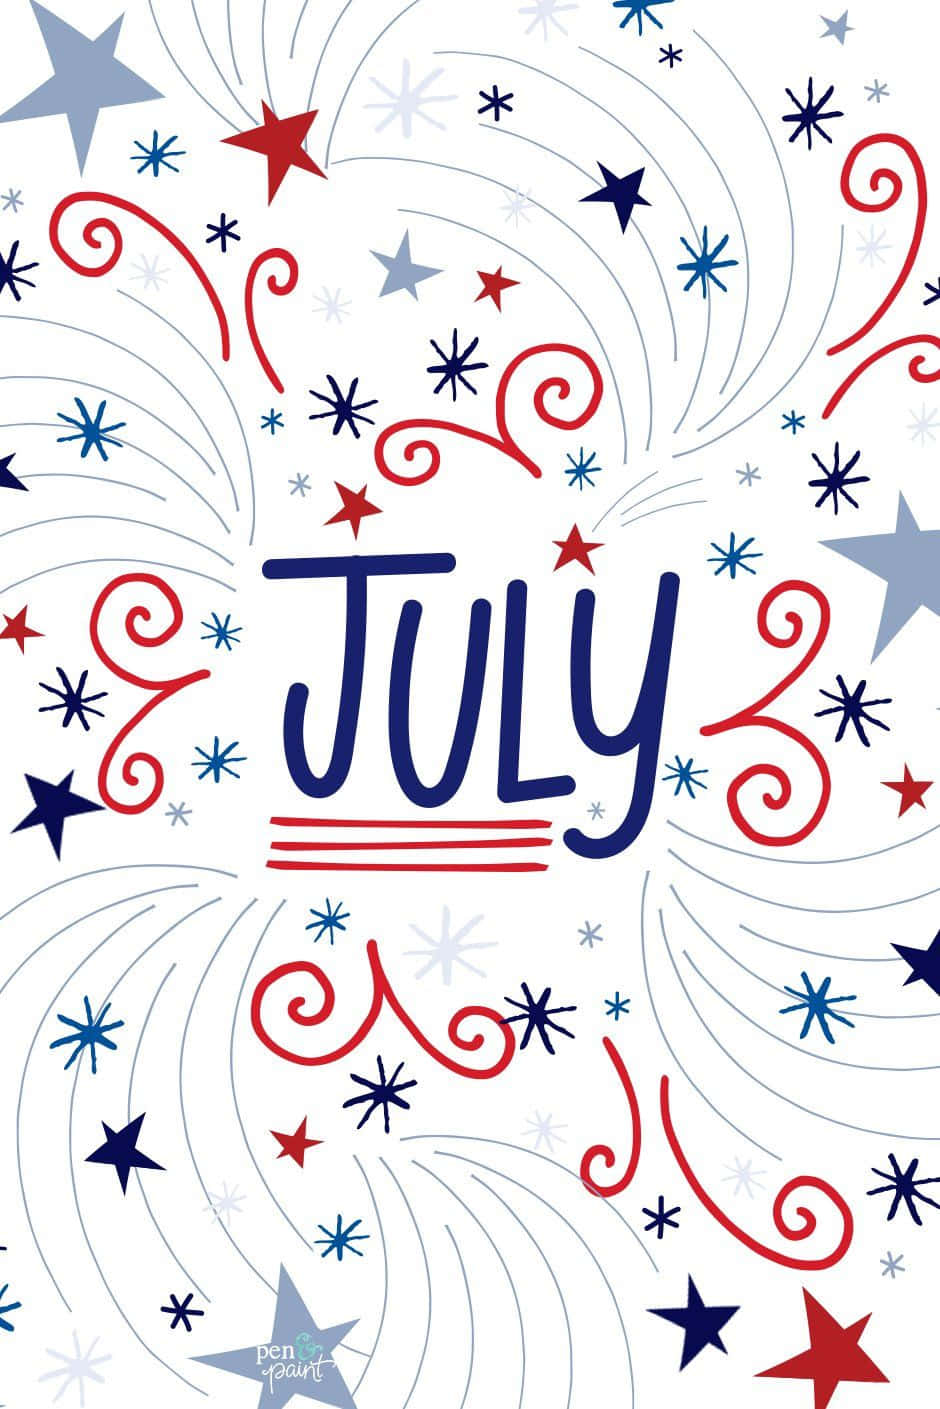 Celebrate the 4th of July with this cute wallpaper!